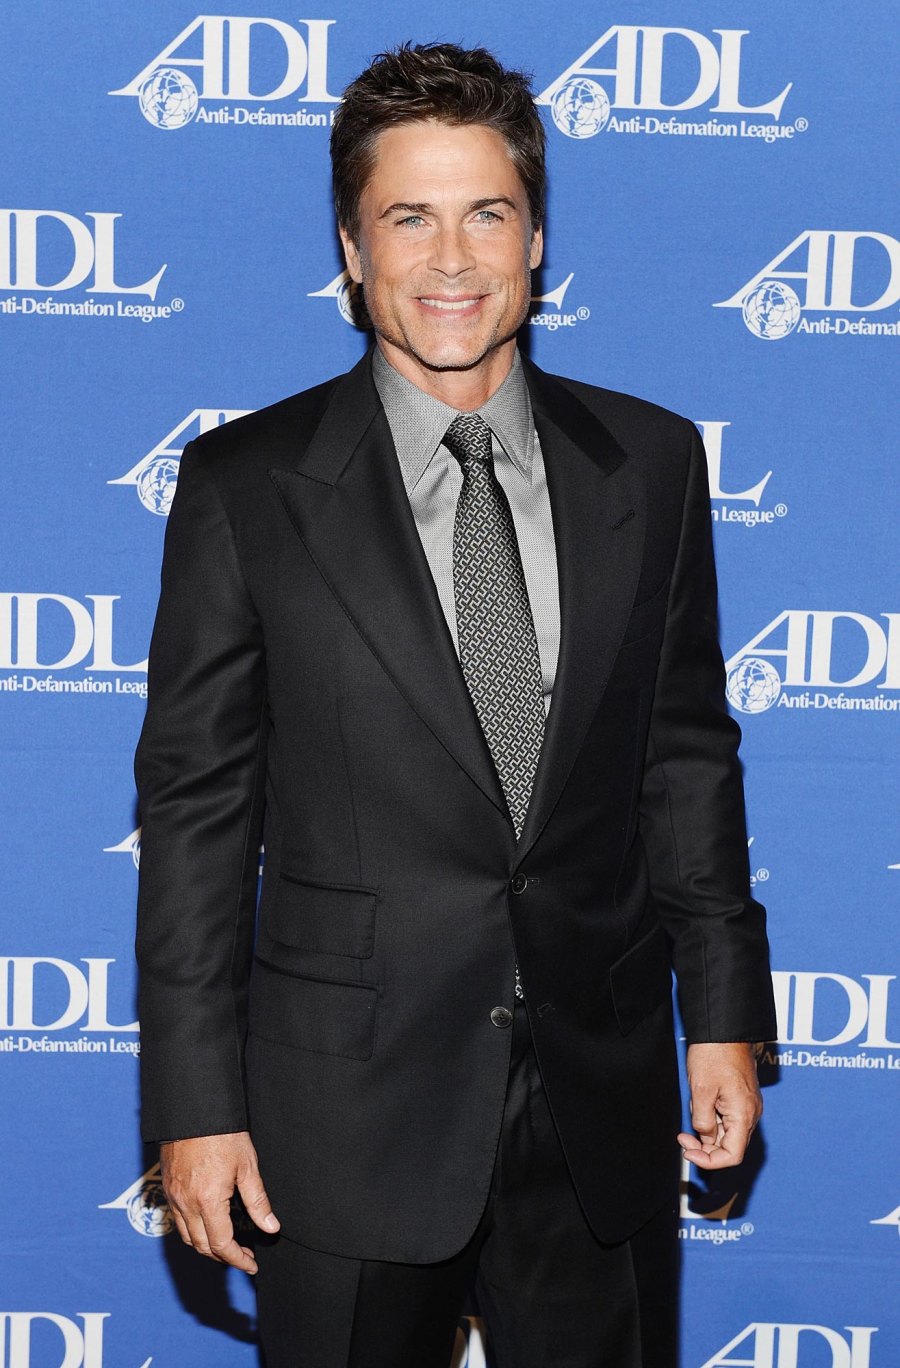 Rob Lowe Through the Years From The Outsiders to The West Wing and Beyond